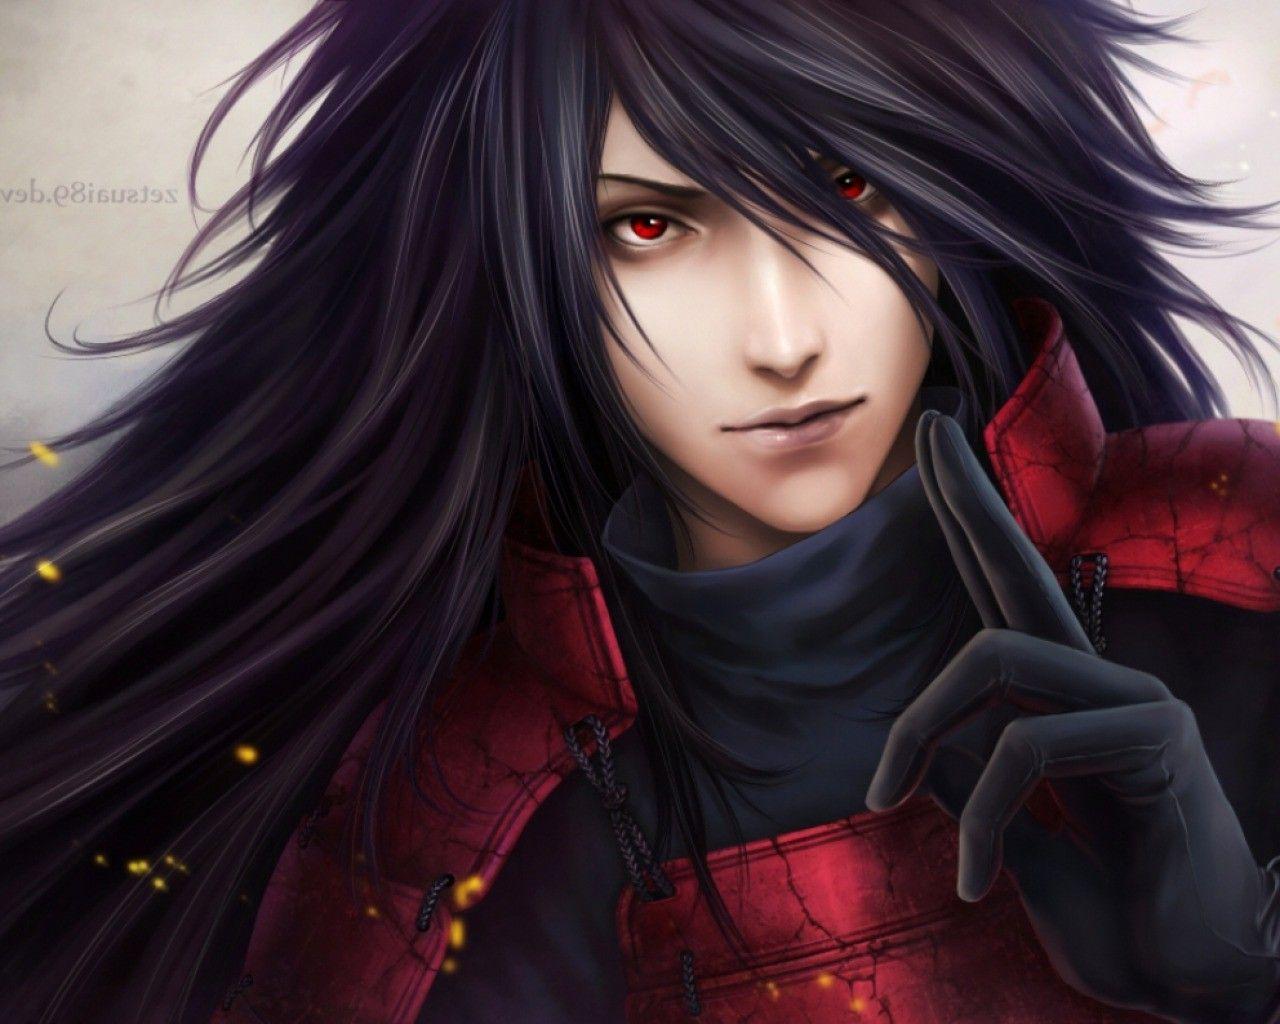 Anime Boy With Long Hair Wallpapers - Wallpaper Cave